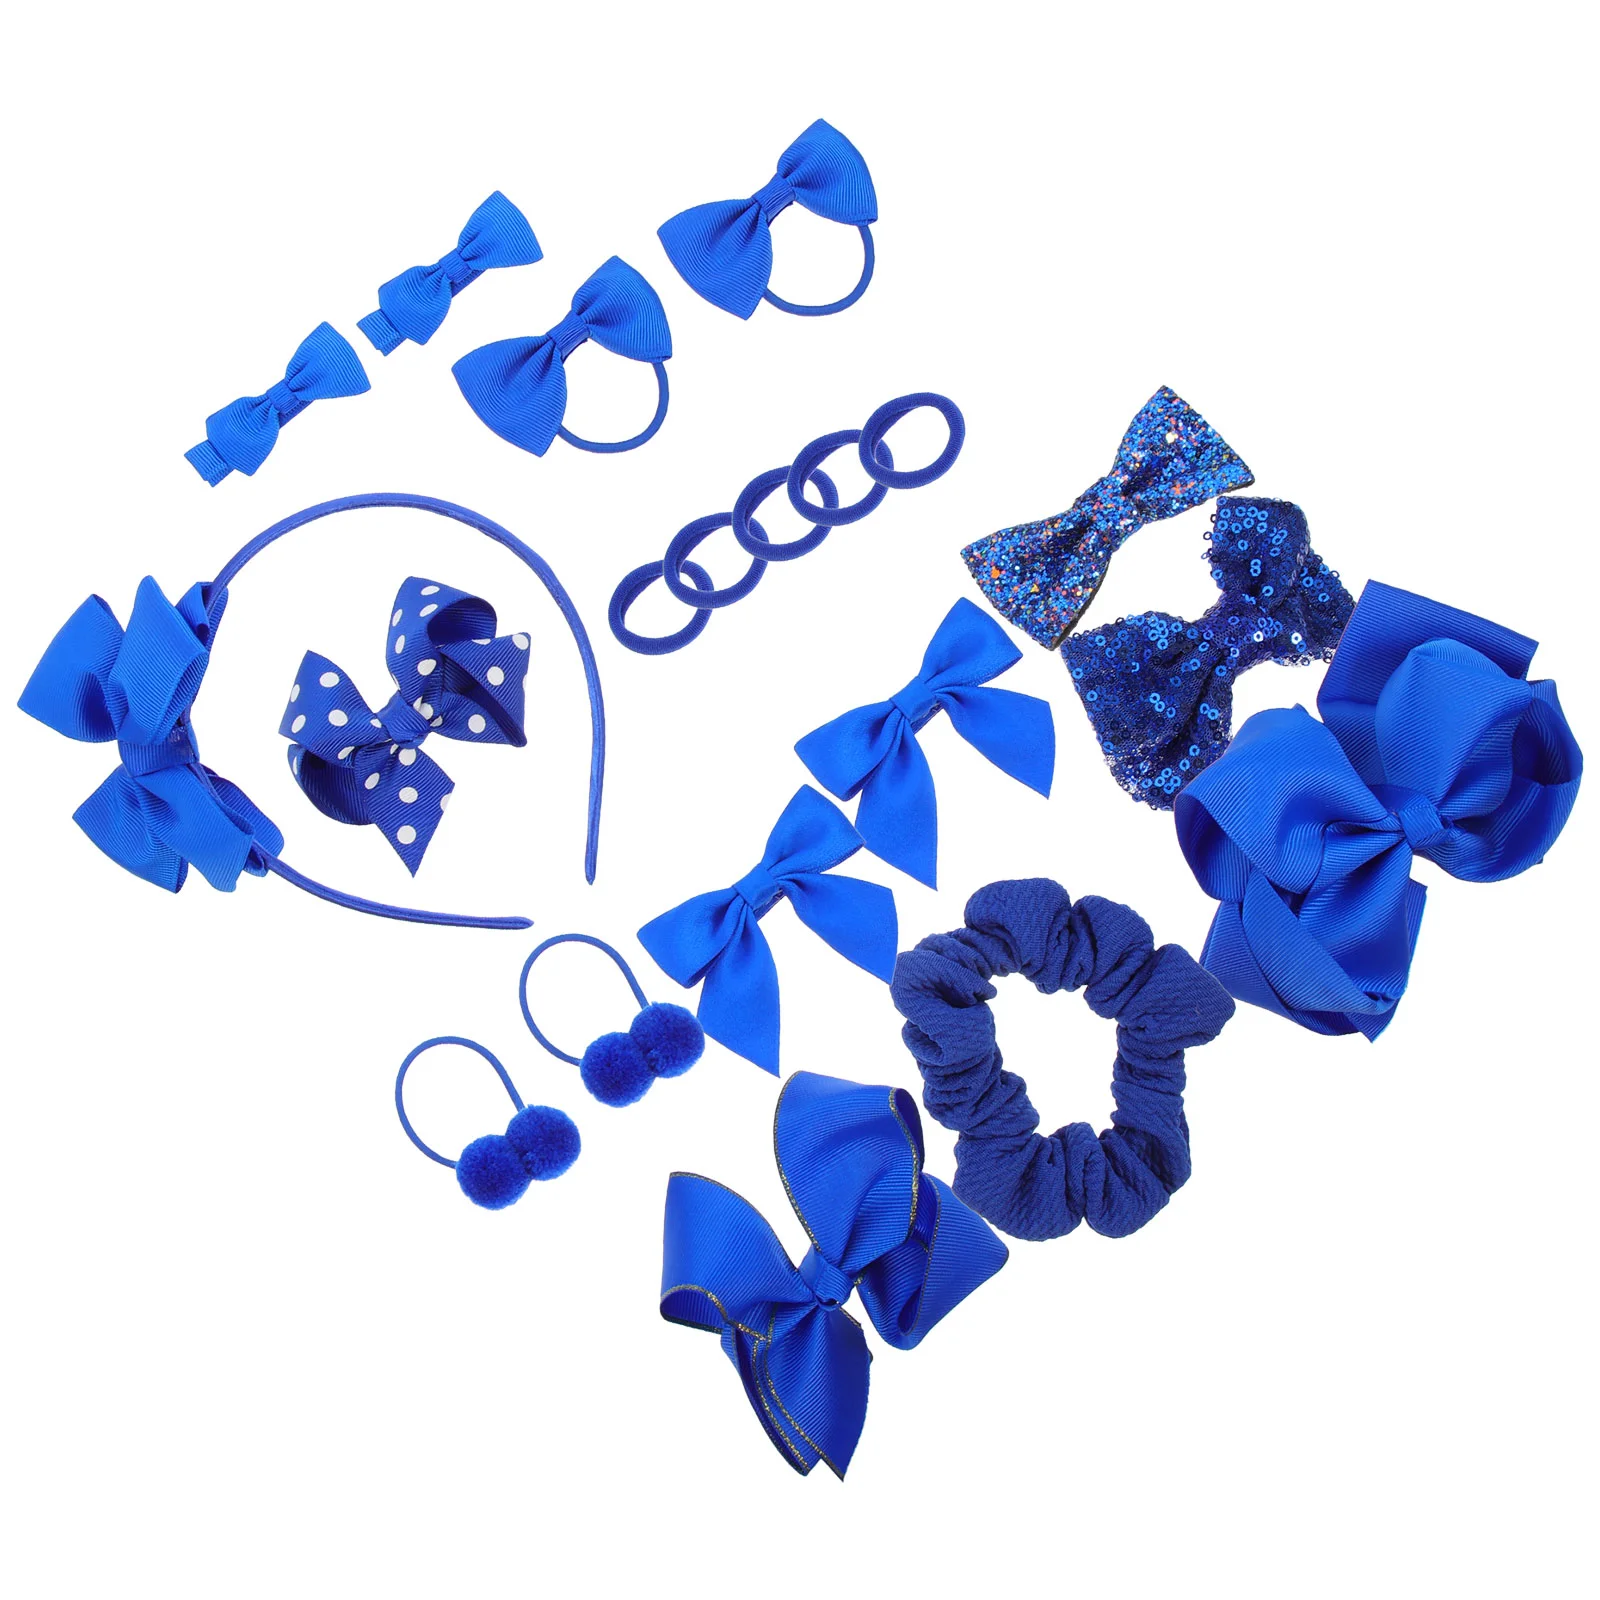 

Klein Blue Hairpin Girls Bows Band Rope Clips Ties Ponytail Holders Baby Headbands